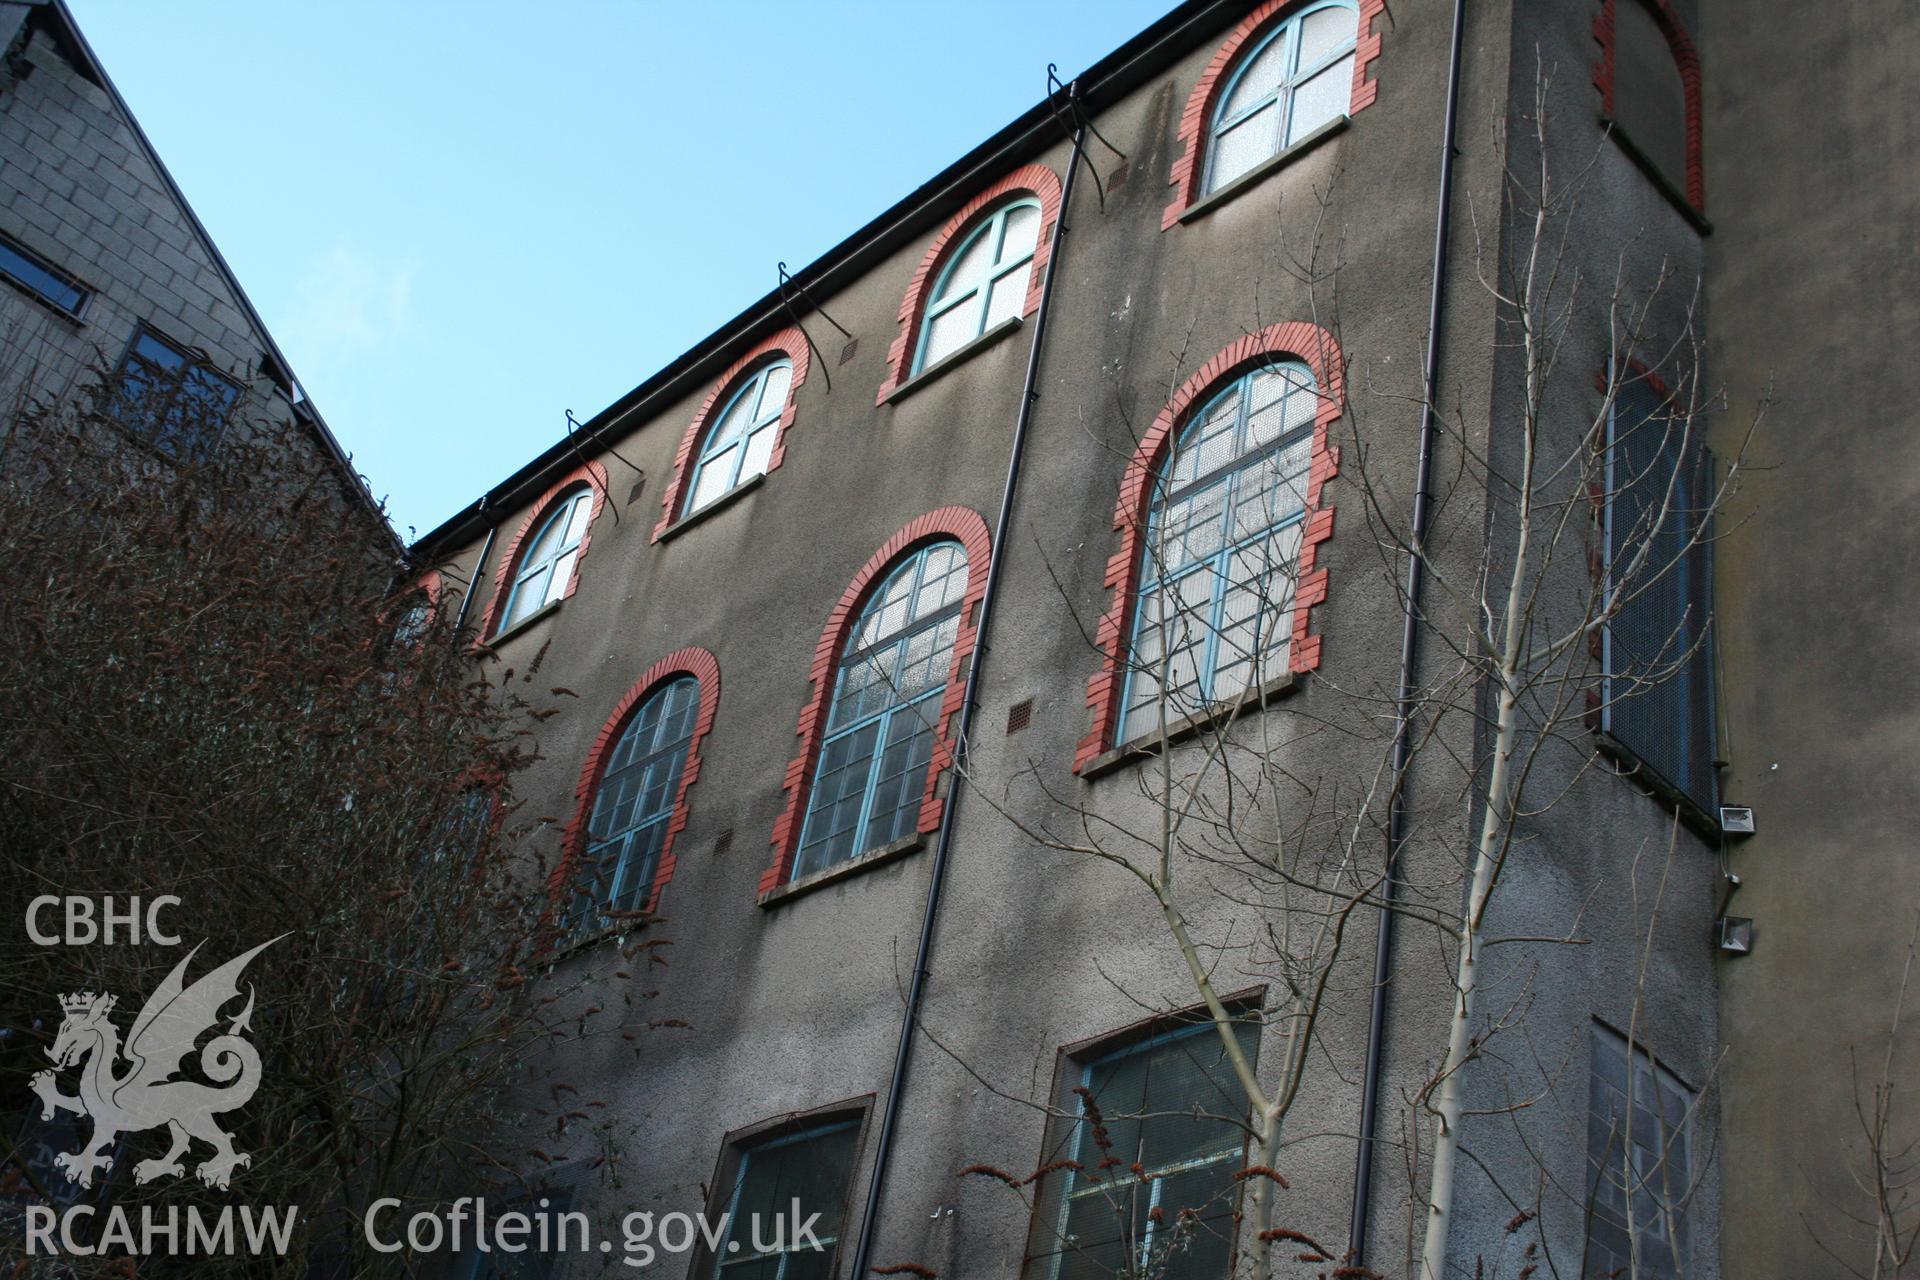 Hanbury Road baptist chapel, Bargoed, digital colour photograph showing exterior - rear, received in the course of Emergency Recording case ref no RCS2/1/2247.